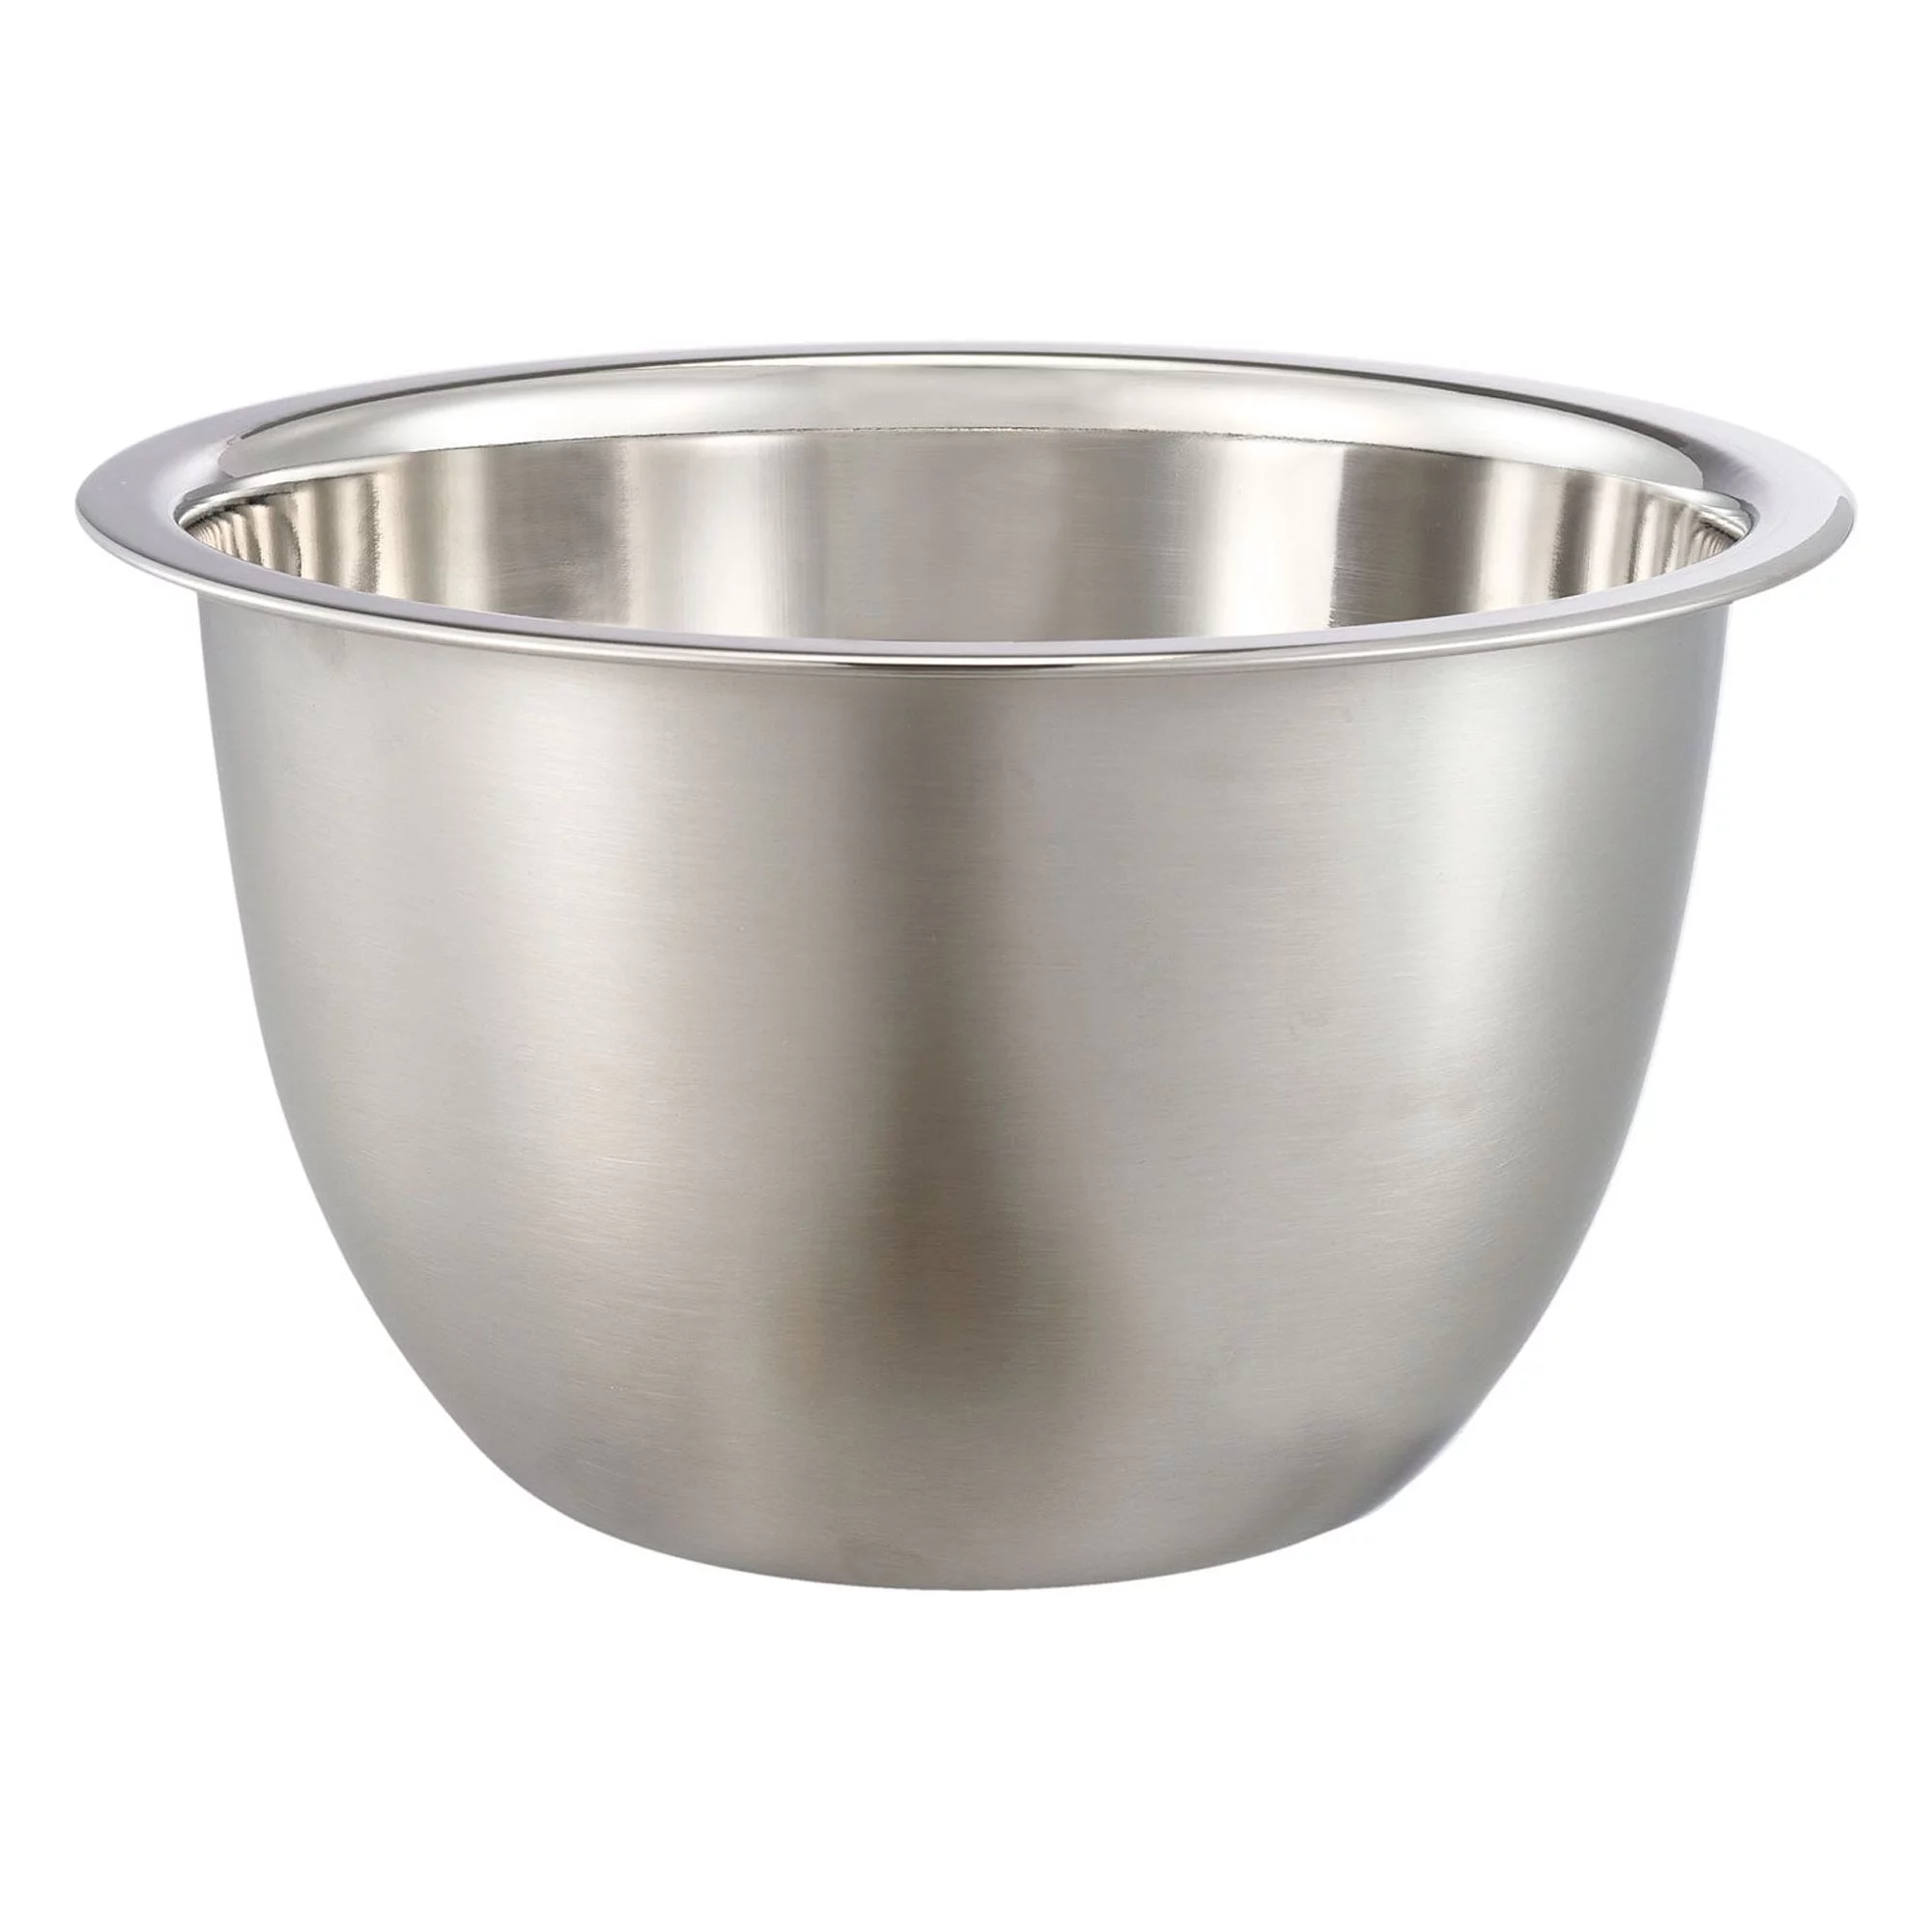 Mainstays SS 3QT Multi-Use Mixing Bowl